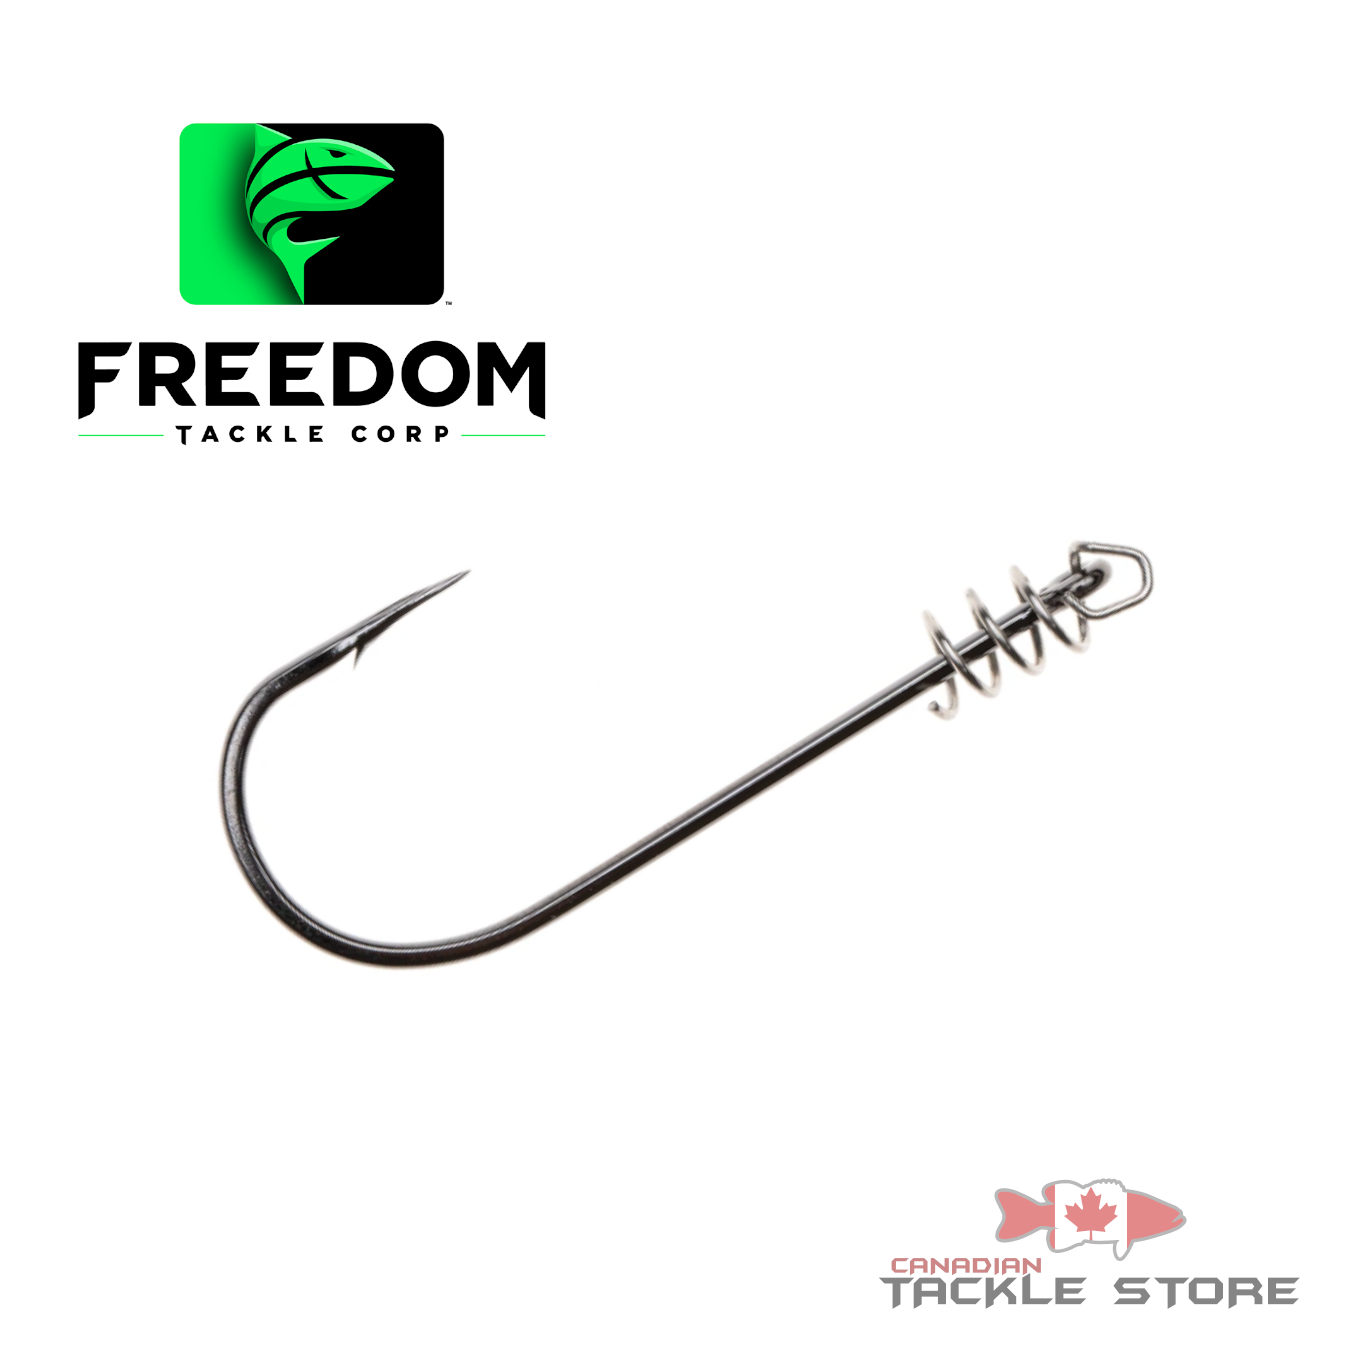 Freedom Tackle – Canadian Tackle Store